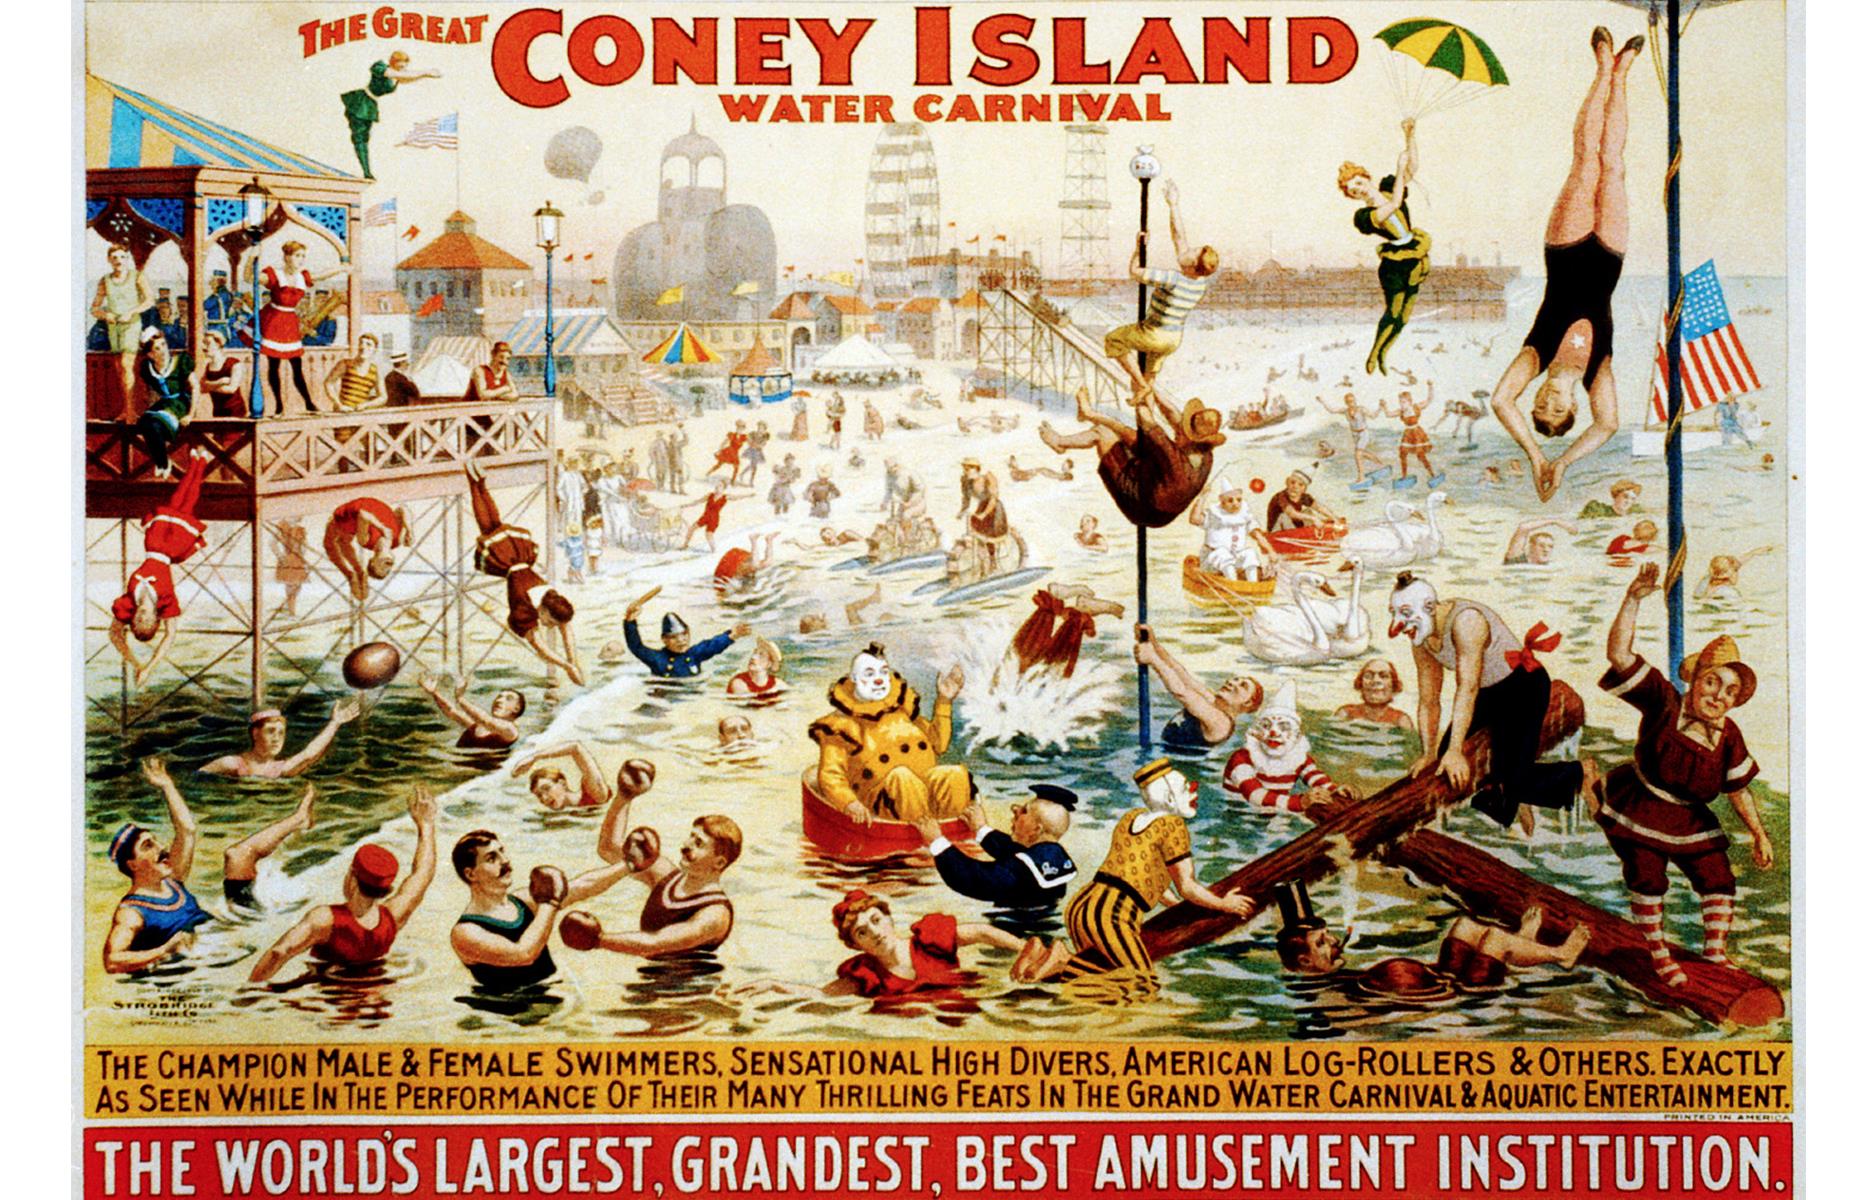 <p>The heady spirit of Coney Island is captured in this fun advert from the late 19th century. It's promoting The Great Coney Island Water Carnival, hosted by the Barnum & Bailey Circus company, and you can spot wading clowns, soaring divers and even boxers making a splash. Coney Island's iconic amusements rise behind the chaos. </p>  <p><a href="https://www.loveexploring.com/gallerylist/103671/worlds-most-beautiful-travel-posters"><strong>Now take a look at the world's most beautiful travel posters</strong></a></p>